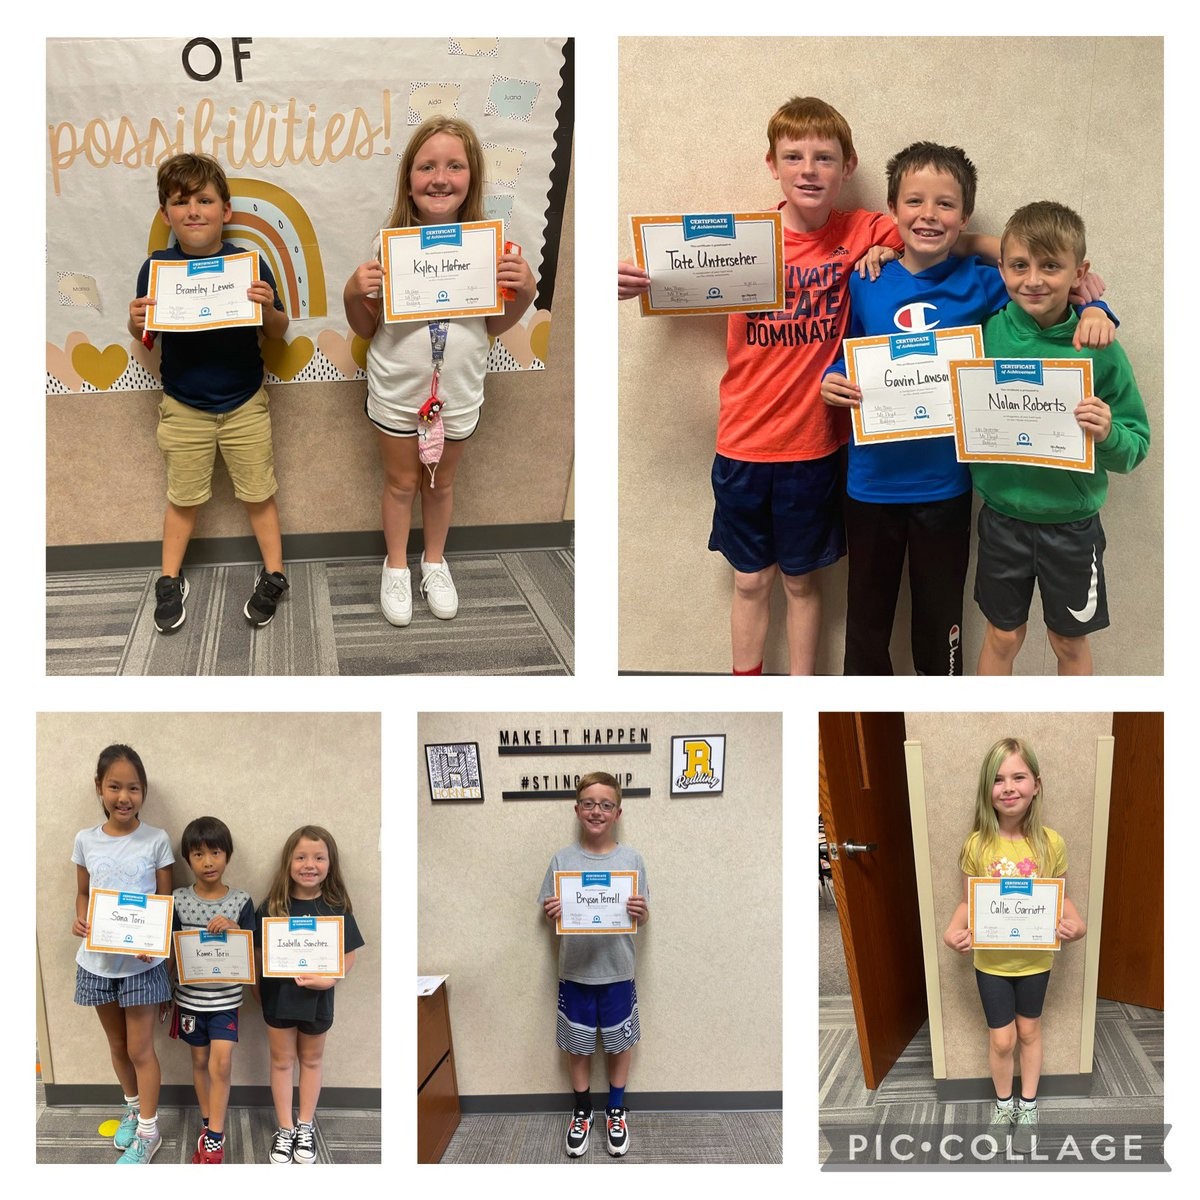 Today we recognized our top performers on the iReady Reading and Math Diagnostic with a certificate and candy! We are proud of their hard work and all our students hard work on their iReady Tests! Keep it up Hornets!  @CurriculumAssoc #stingersup #strive pic.twitter.com/LXD2Yz9ecH